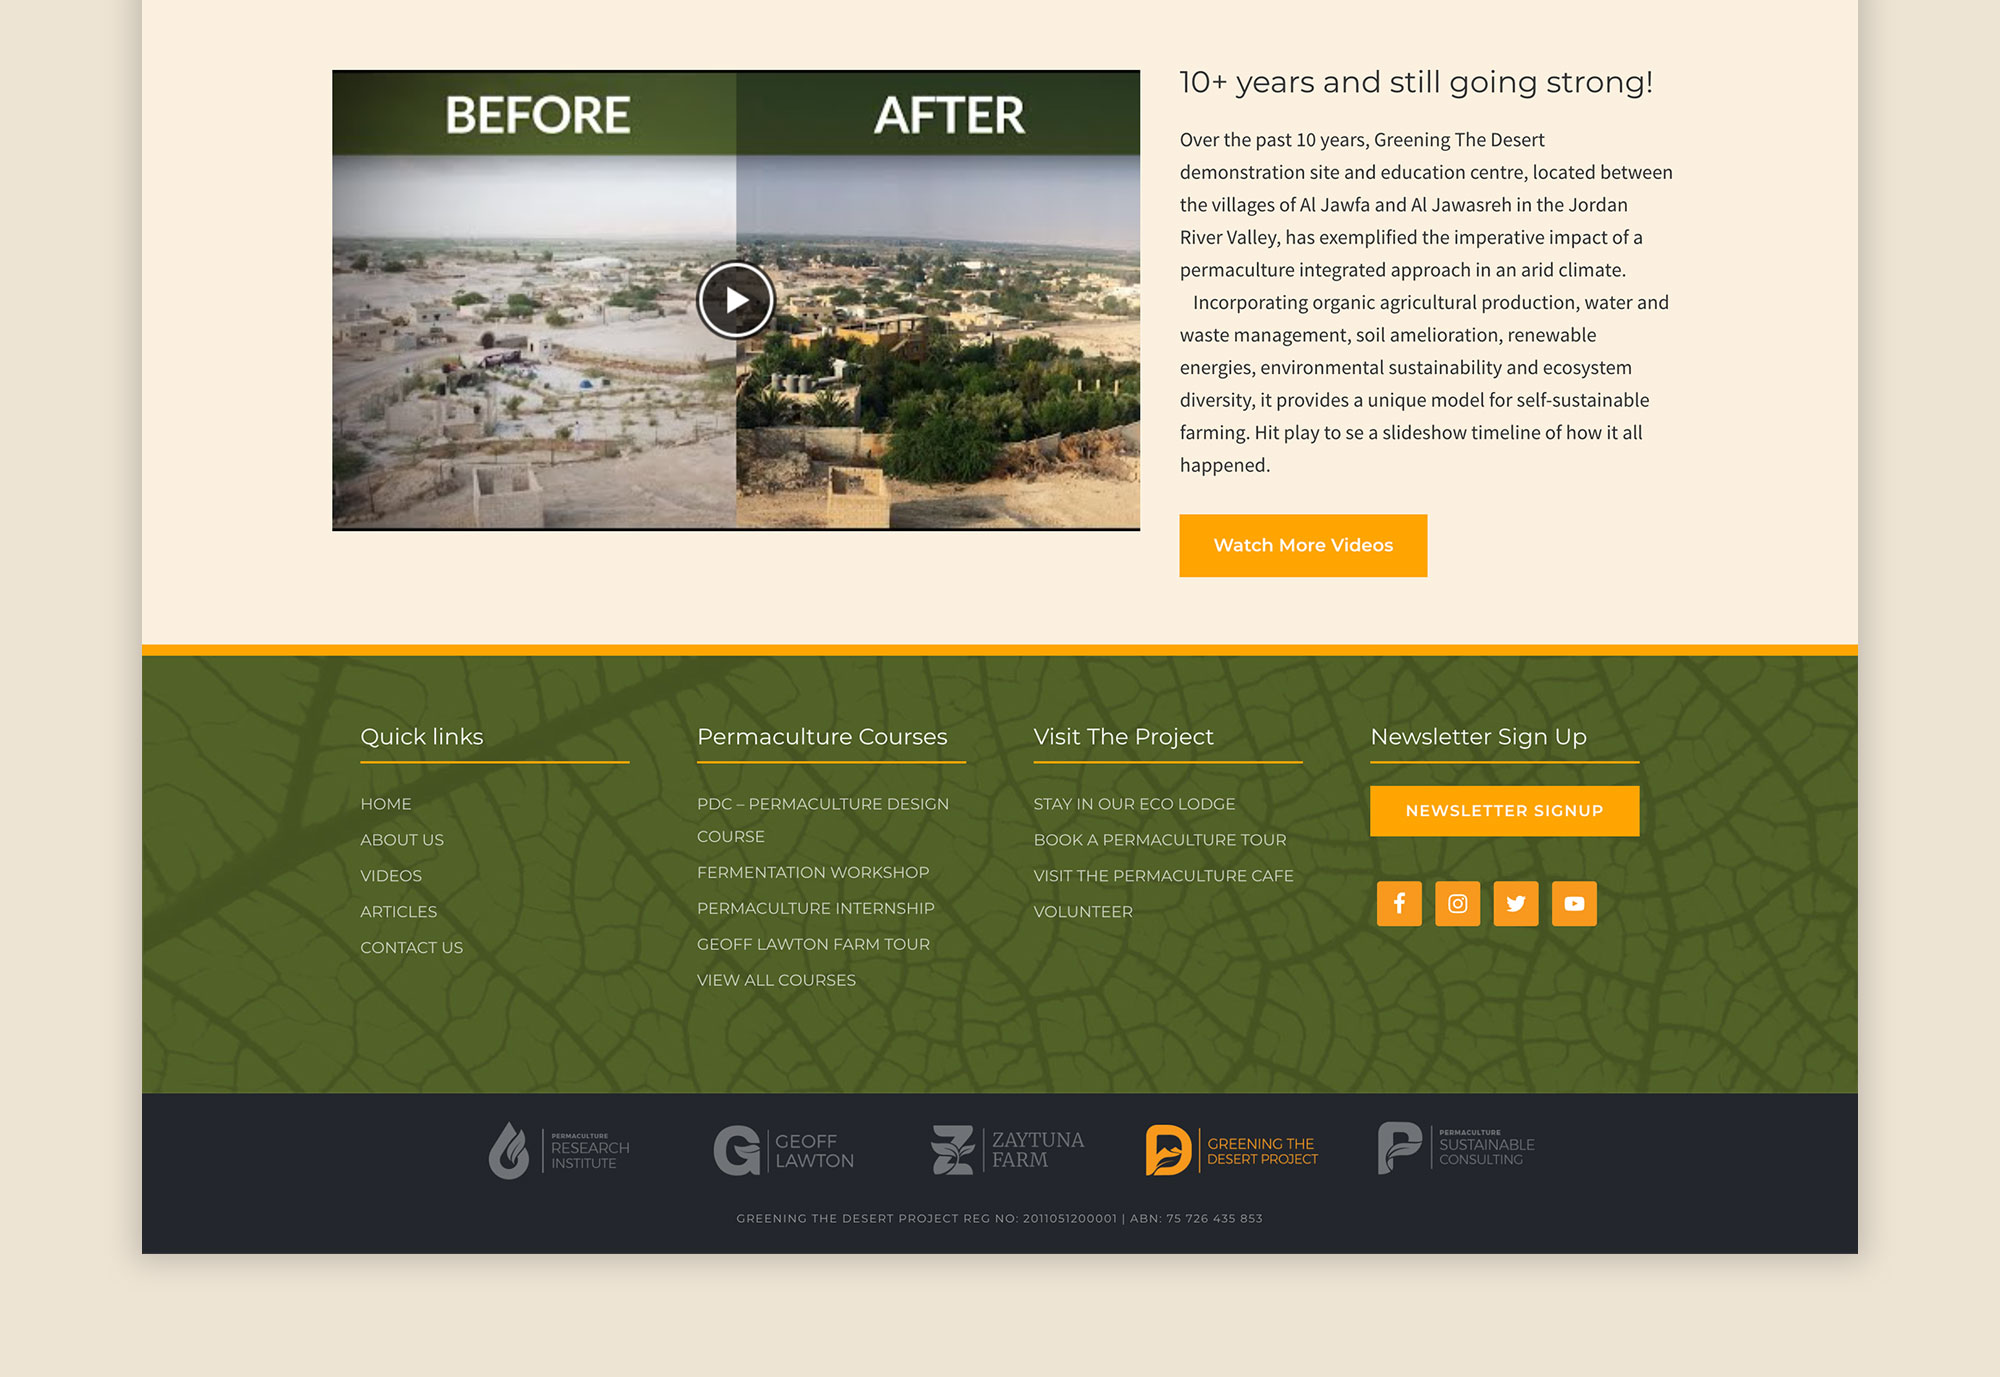 Permaculture Site Greening the desert project website design